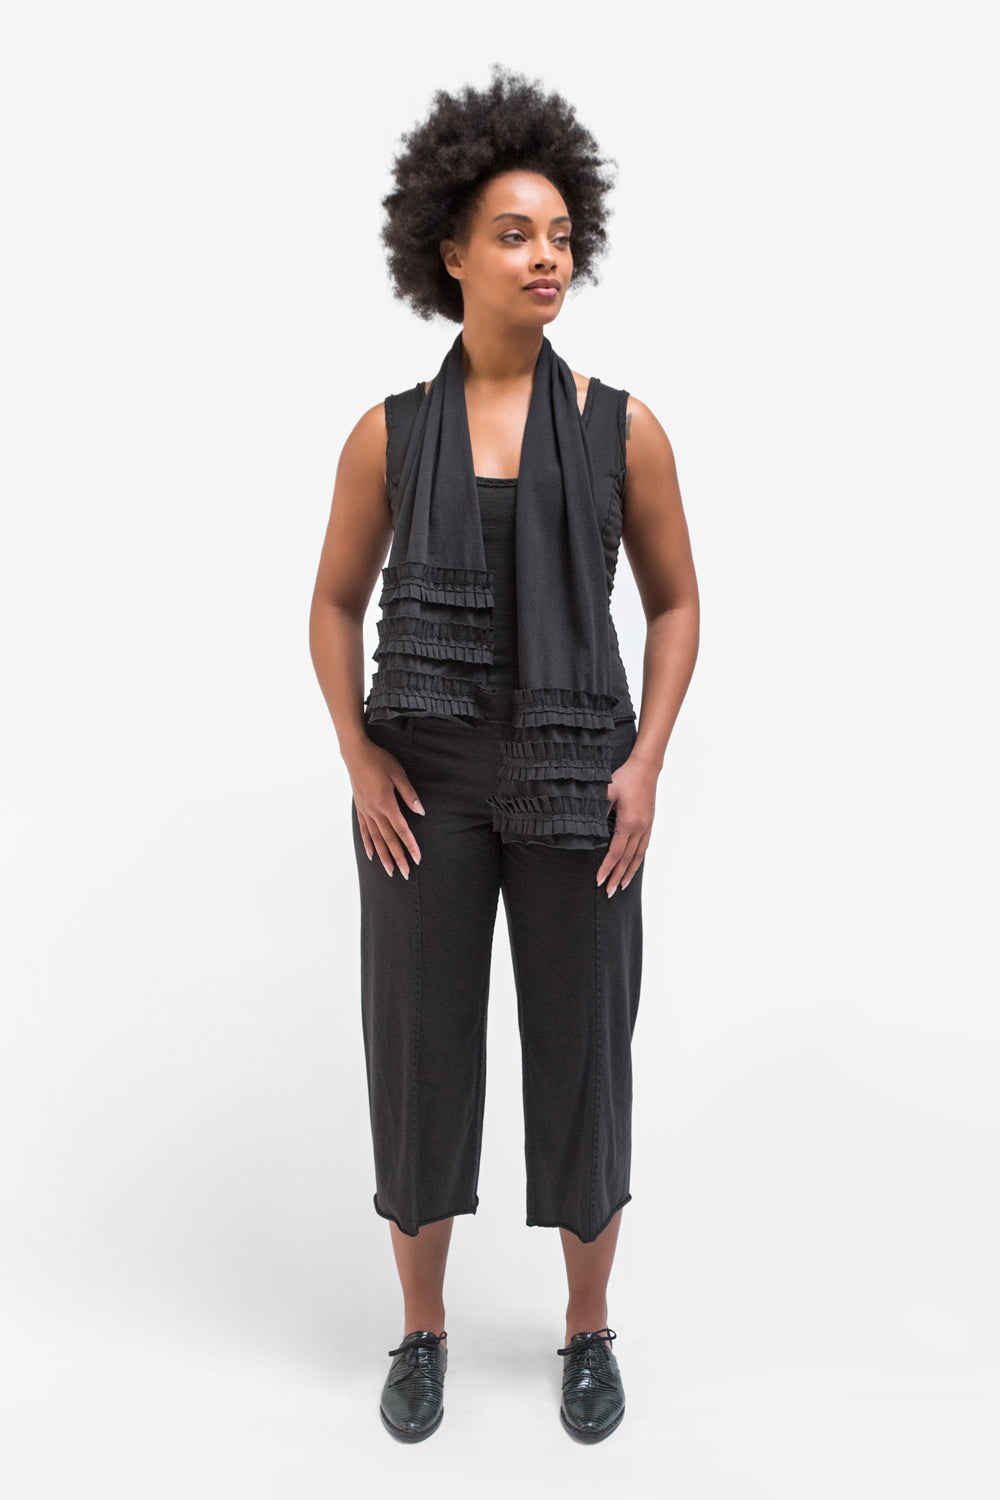 The School of Making The Crop Pant Kit Basic Hand-Sewn Pant for Makers